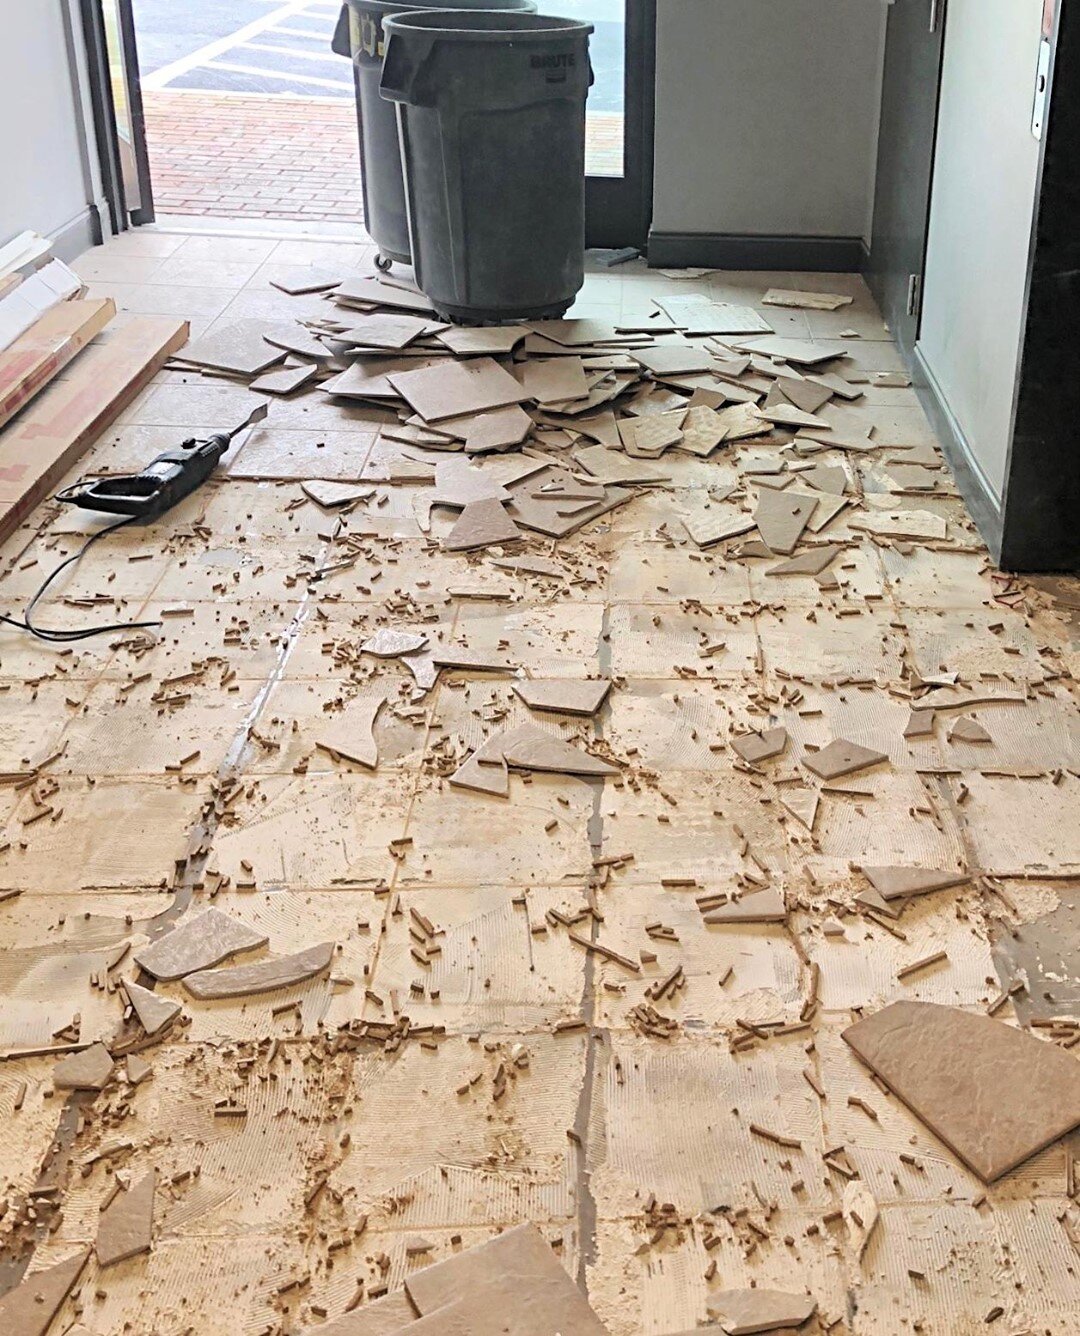 THREE DAY WEEKEND!!! Should give us enough time to clean up this mess 😉
˙
˙
˙
˙
˙
˙
#Nashvilleflooring #Nashvilleflooringinc #flooringsolutions #middletnflooring #flooringexperts #localnashville #nashvillefloors #flooringdemo #commercialflooring #co